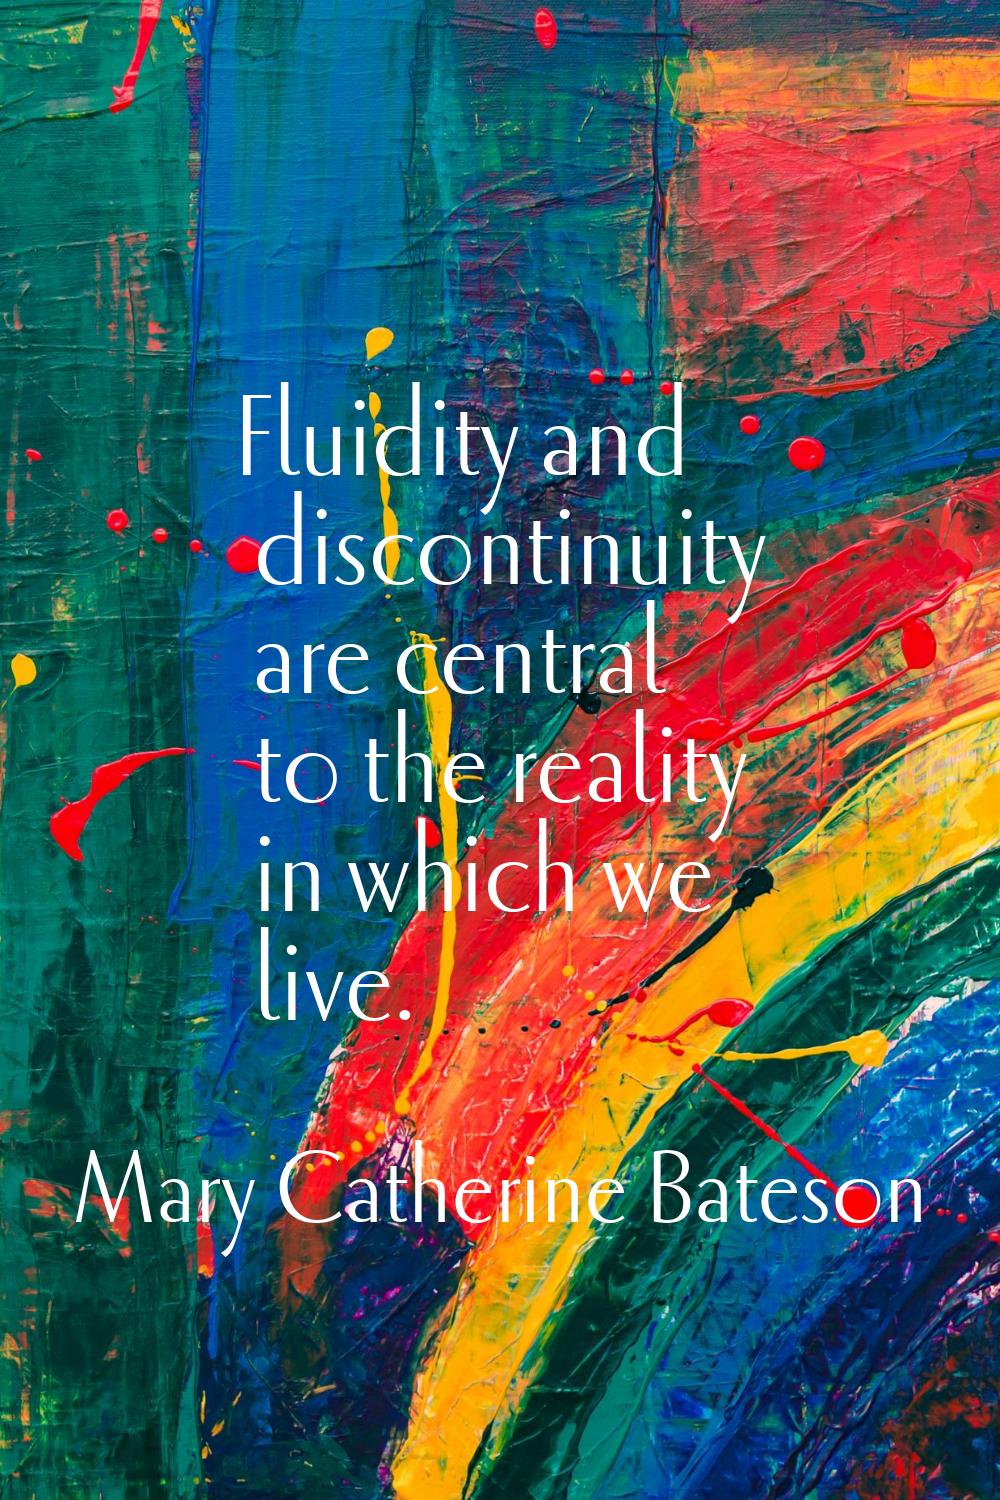 Fluidity and discontinuity are central to the reality in which we live.